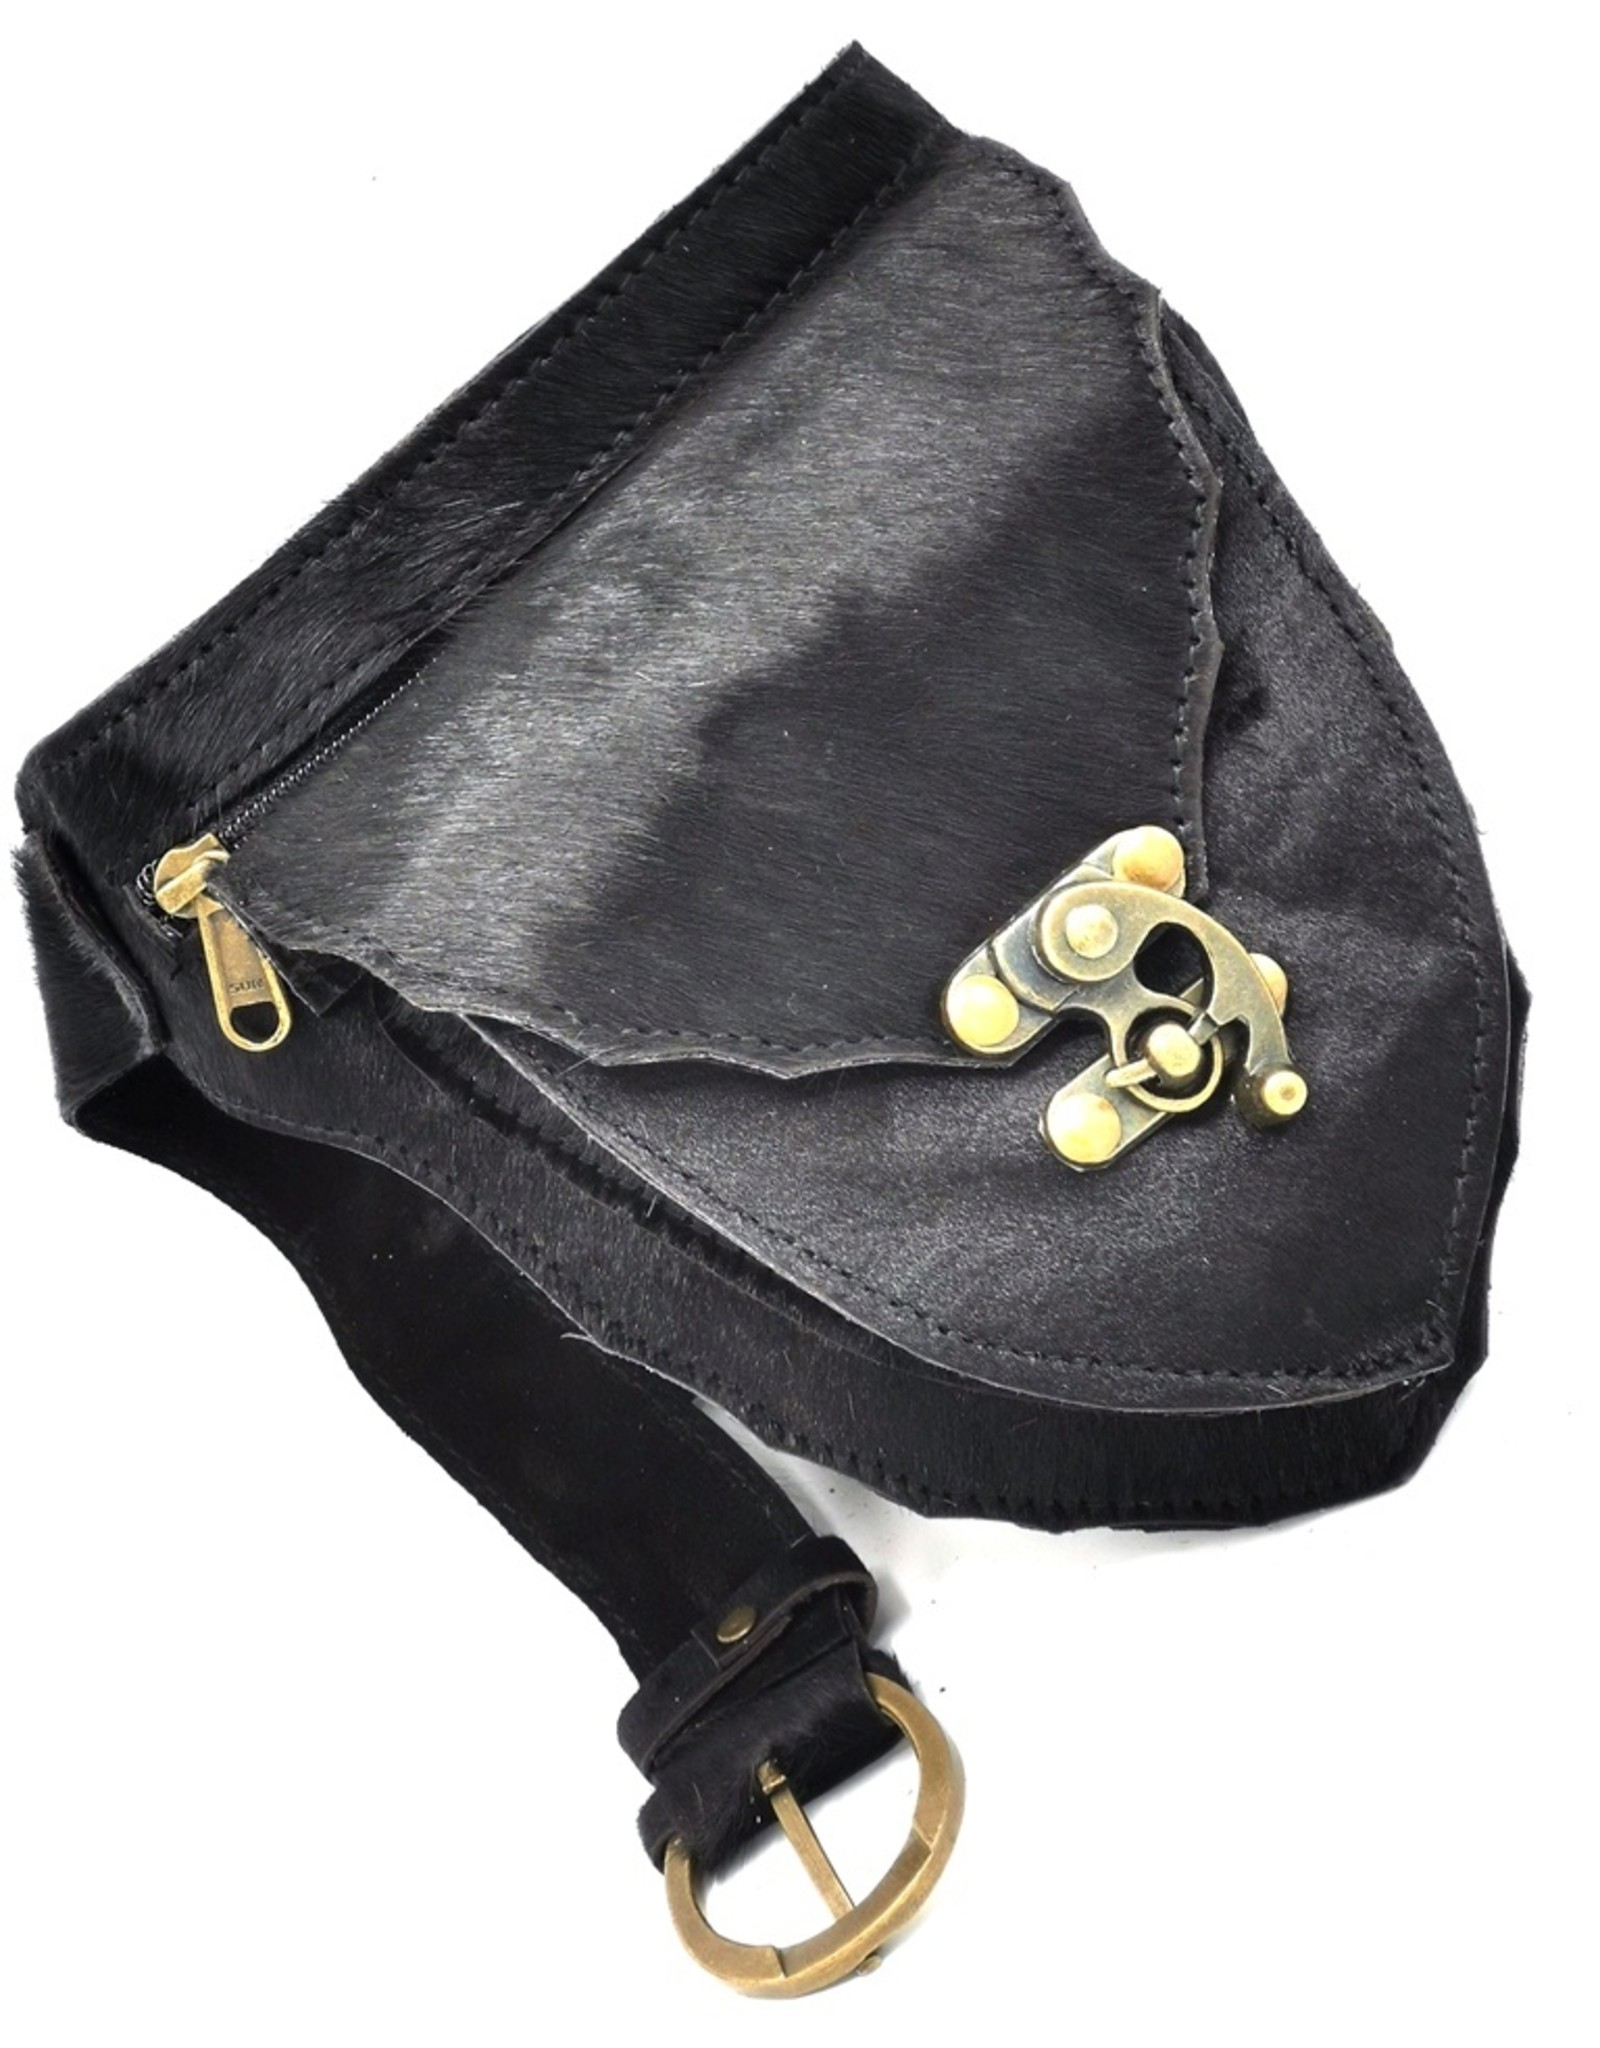 ONK Small leather bags, cluches and more -  Cowhide Waistbag with Hook (black)